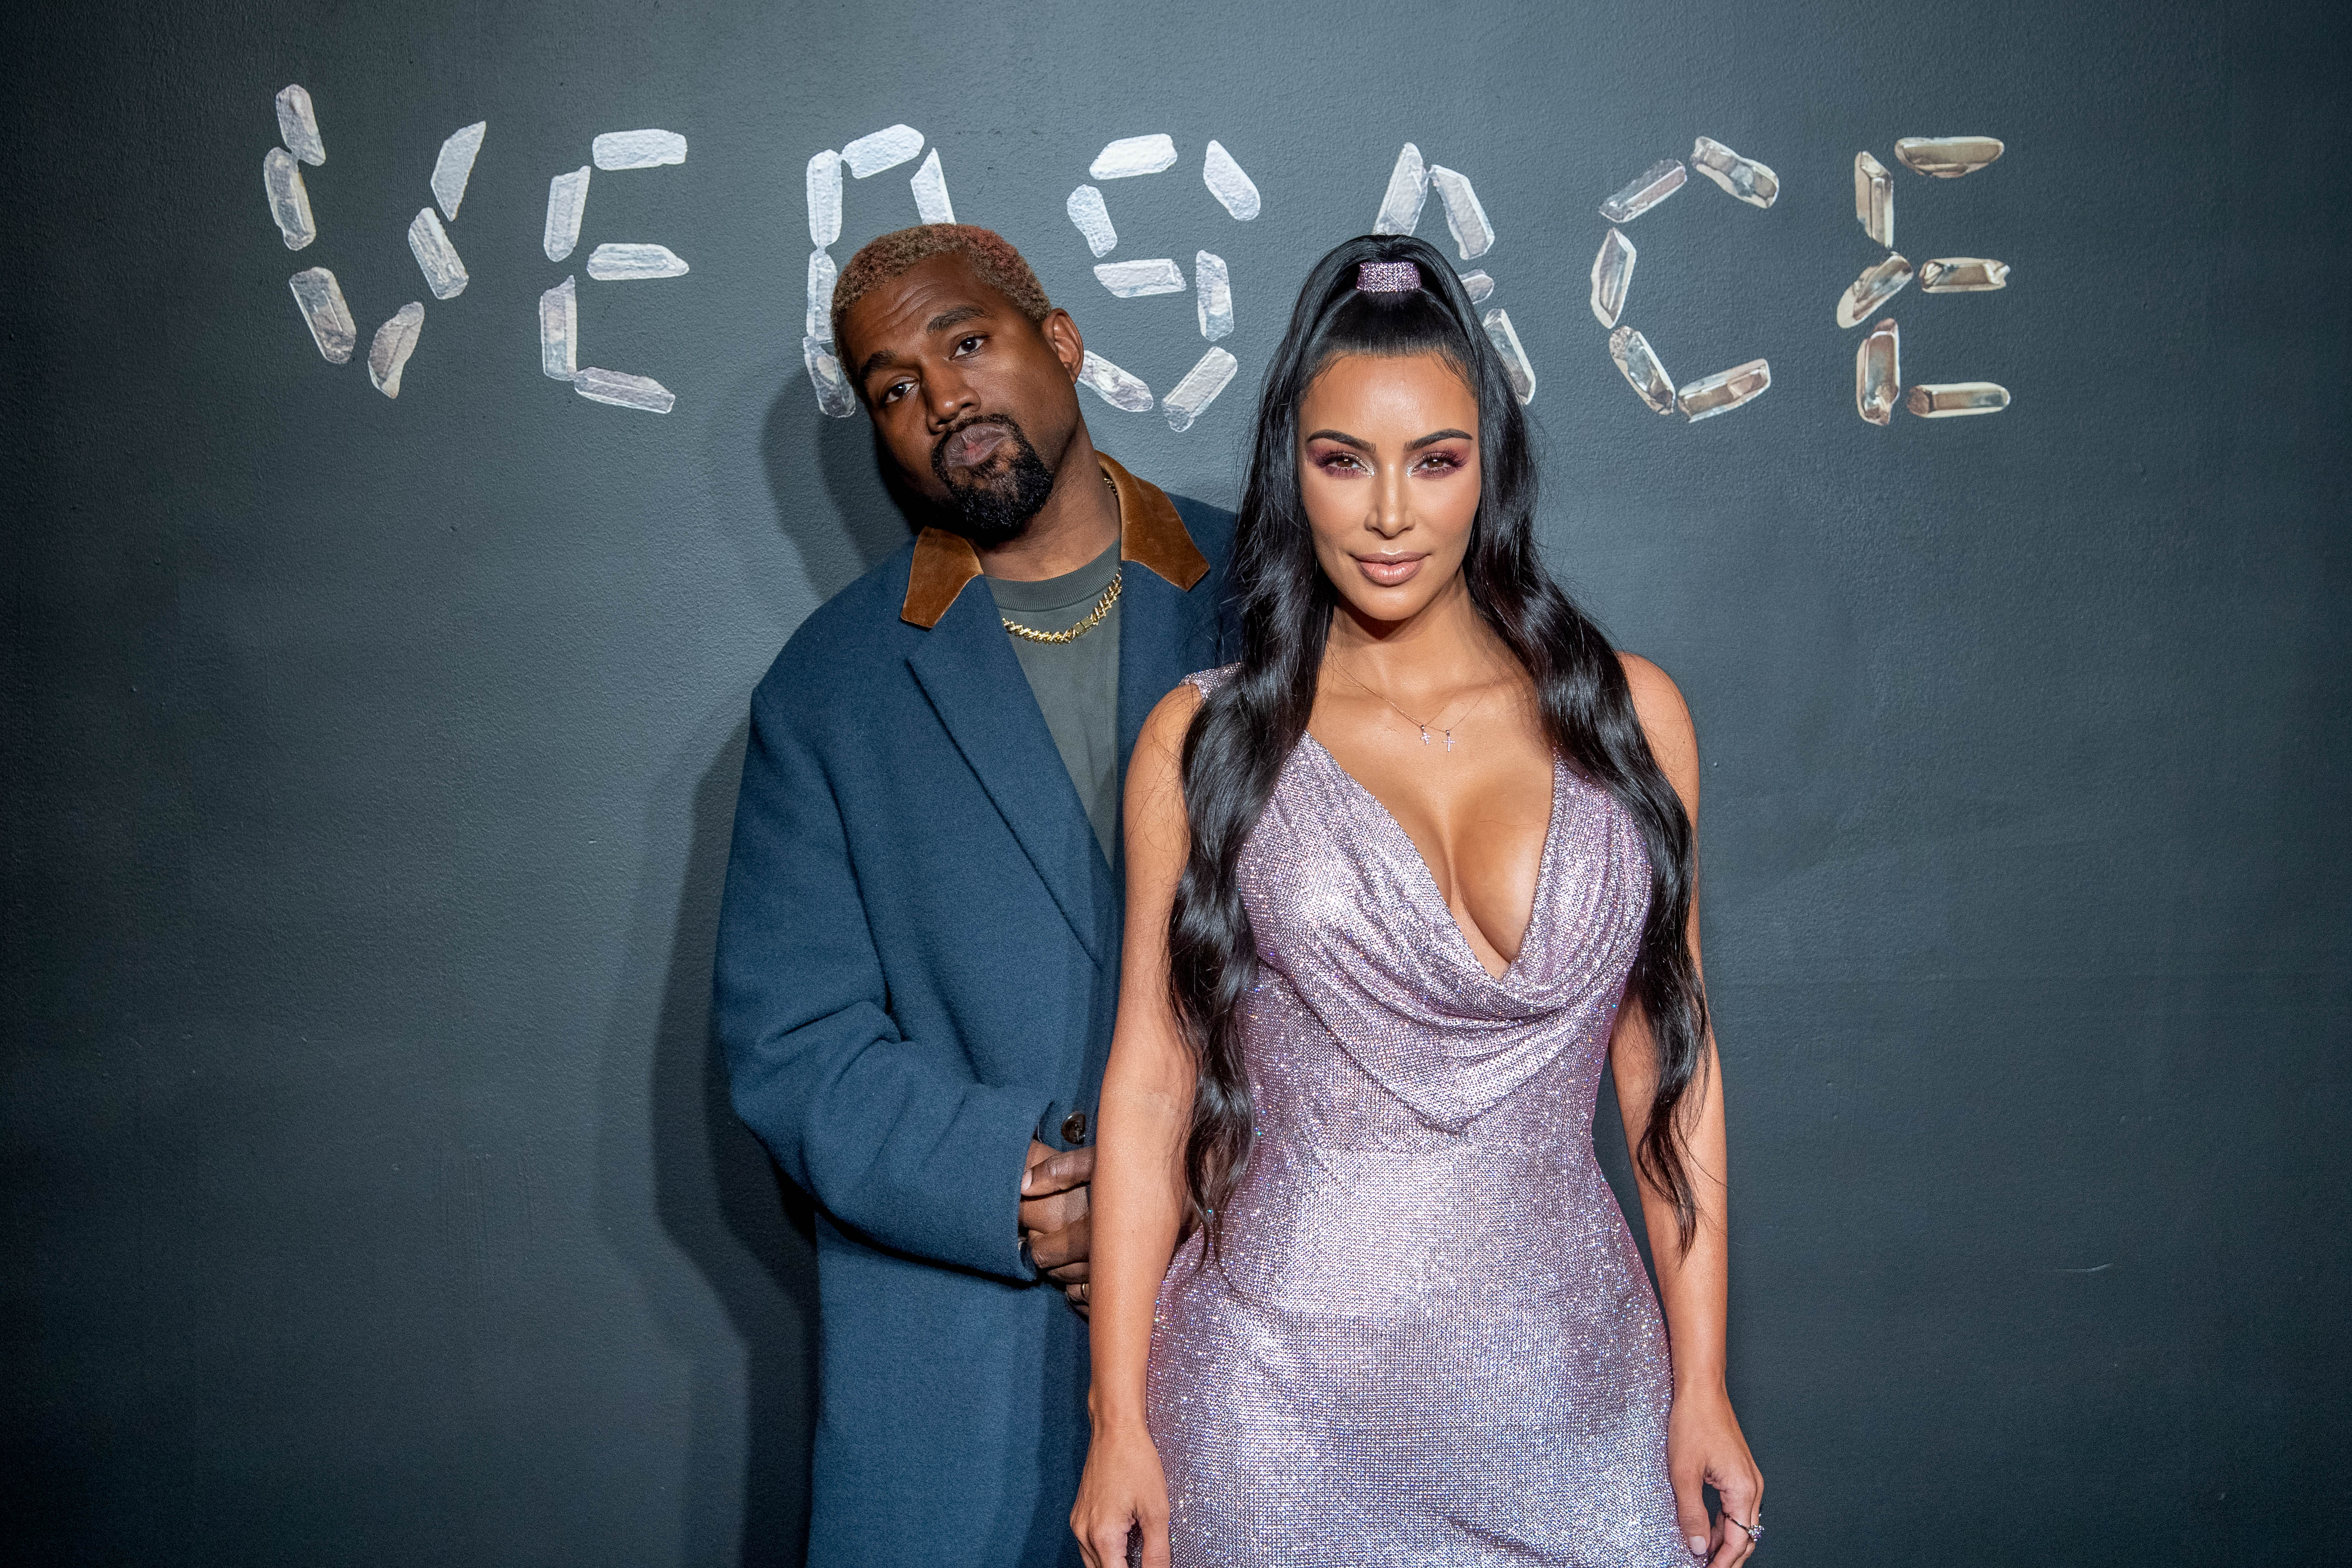 Kanye West and Kim Kardashian West attend the the Versace Fall 2019 Fashion Show on December 02, 2018, in New York City. | Source: Getty Images.